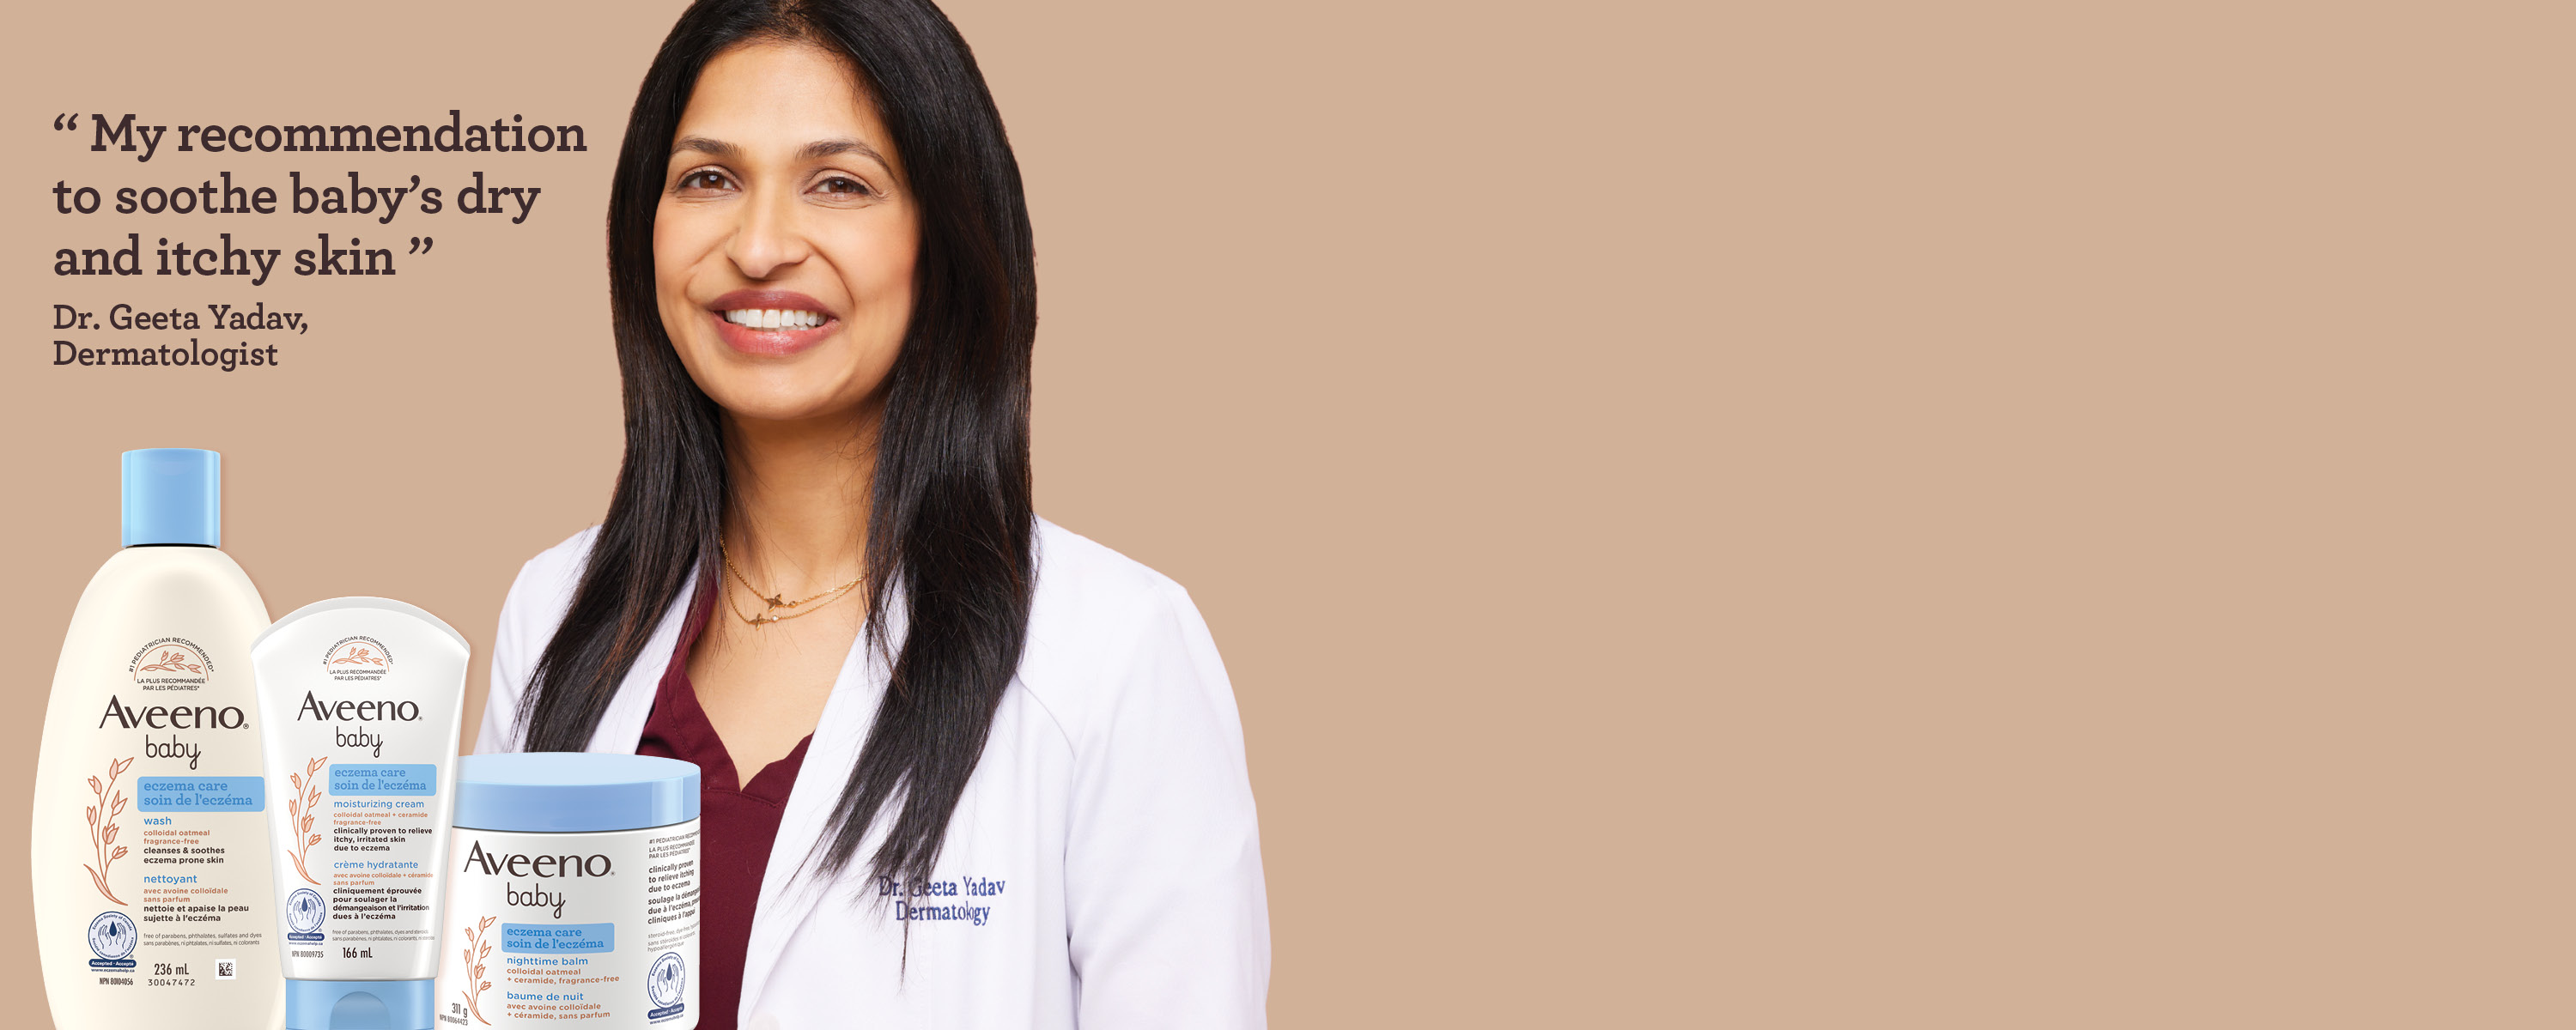 Female dermatologist Geeta Yadav smiling and her statement saying‘ My recommendation to soothe baby’s dry and itchy skin’ with 3 Aveeno Baby eczema products in front of her.